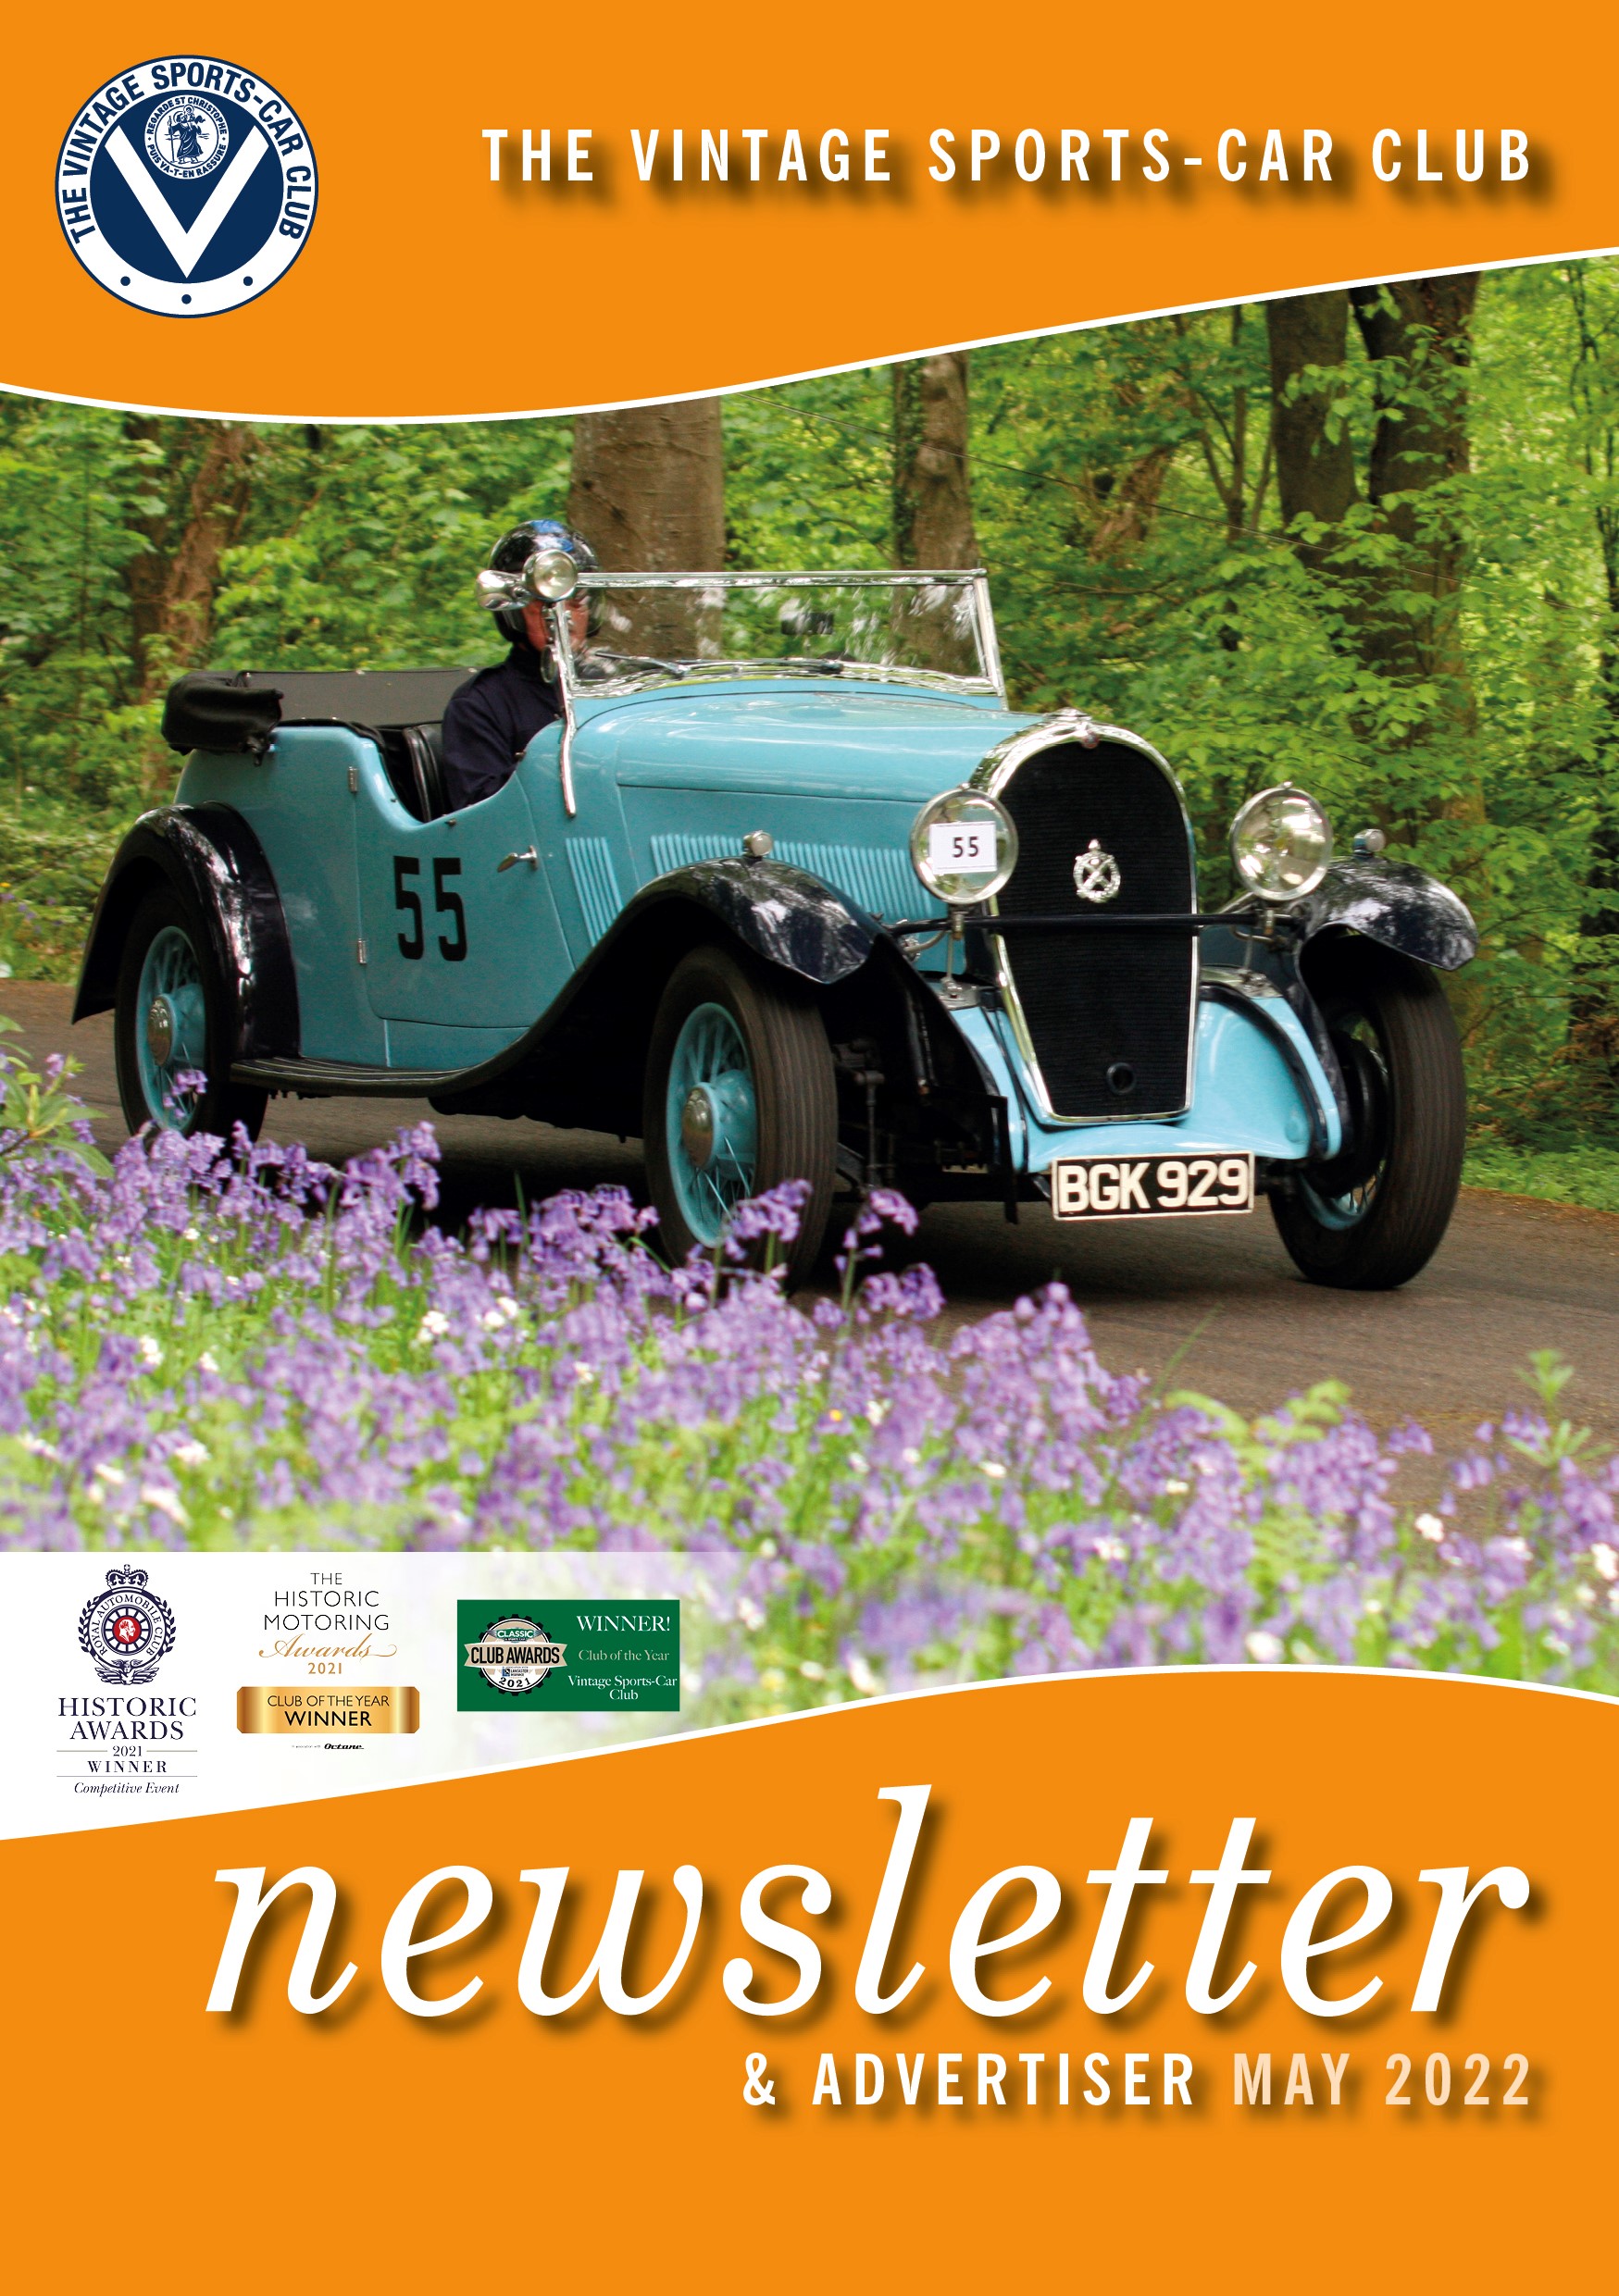 May 2022 Newsletter Now Available